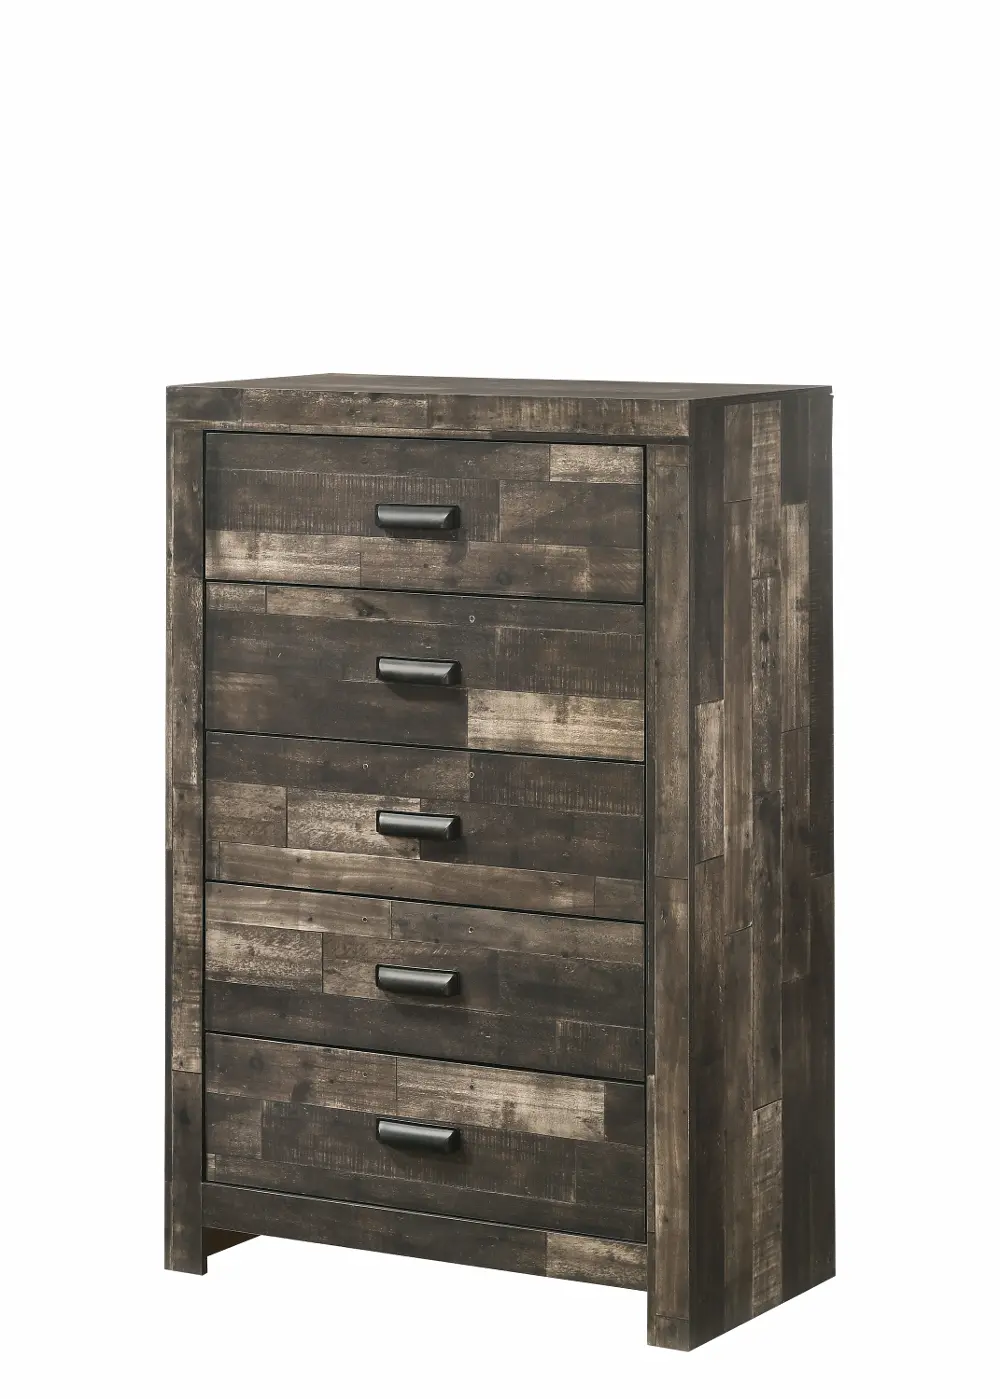 Modern Rustic Chest of Drawers - Tallulah-1